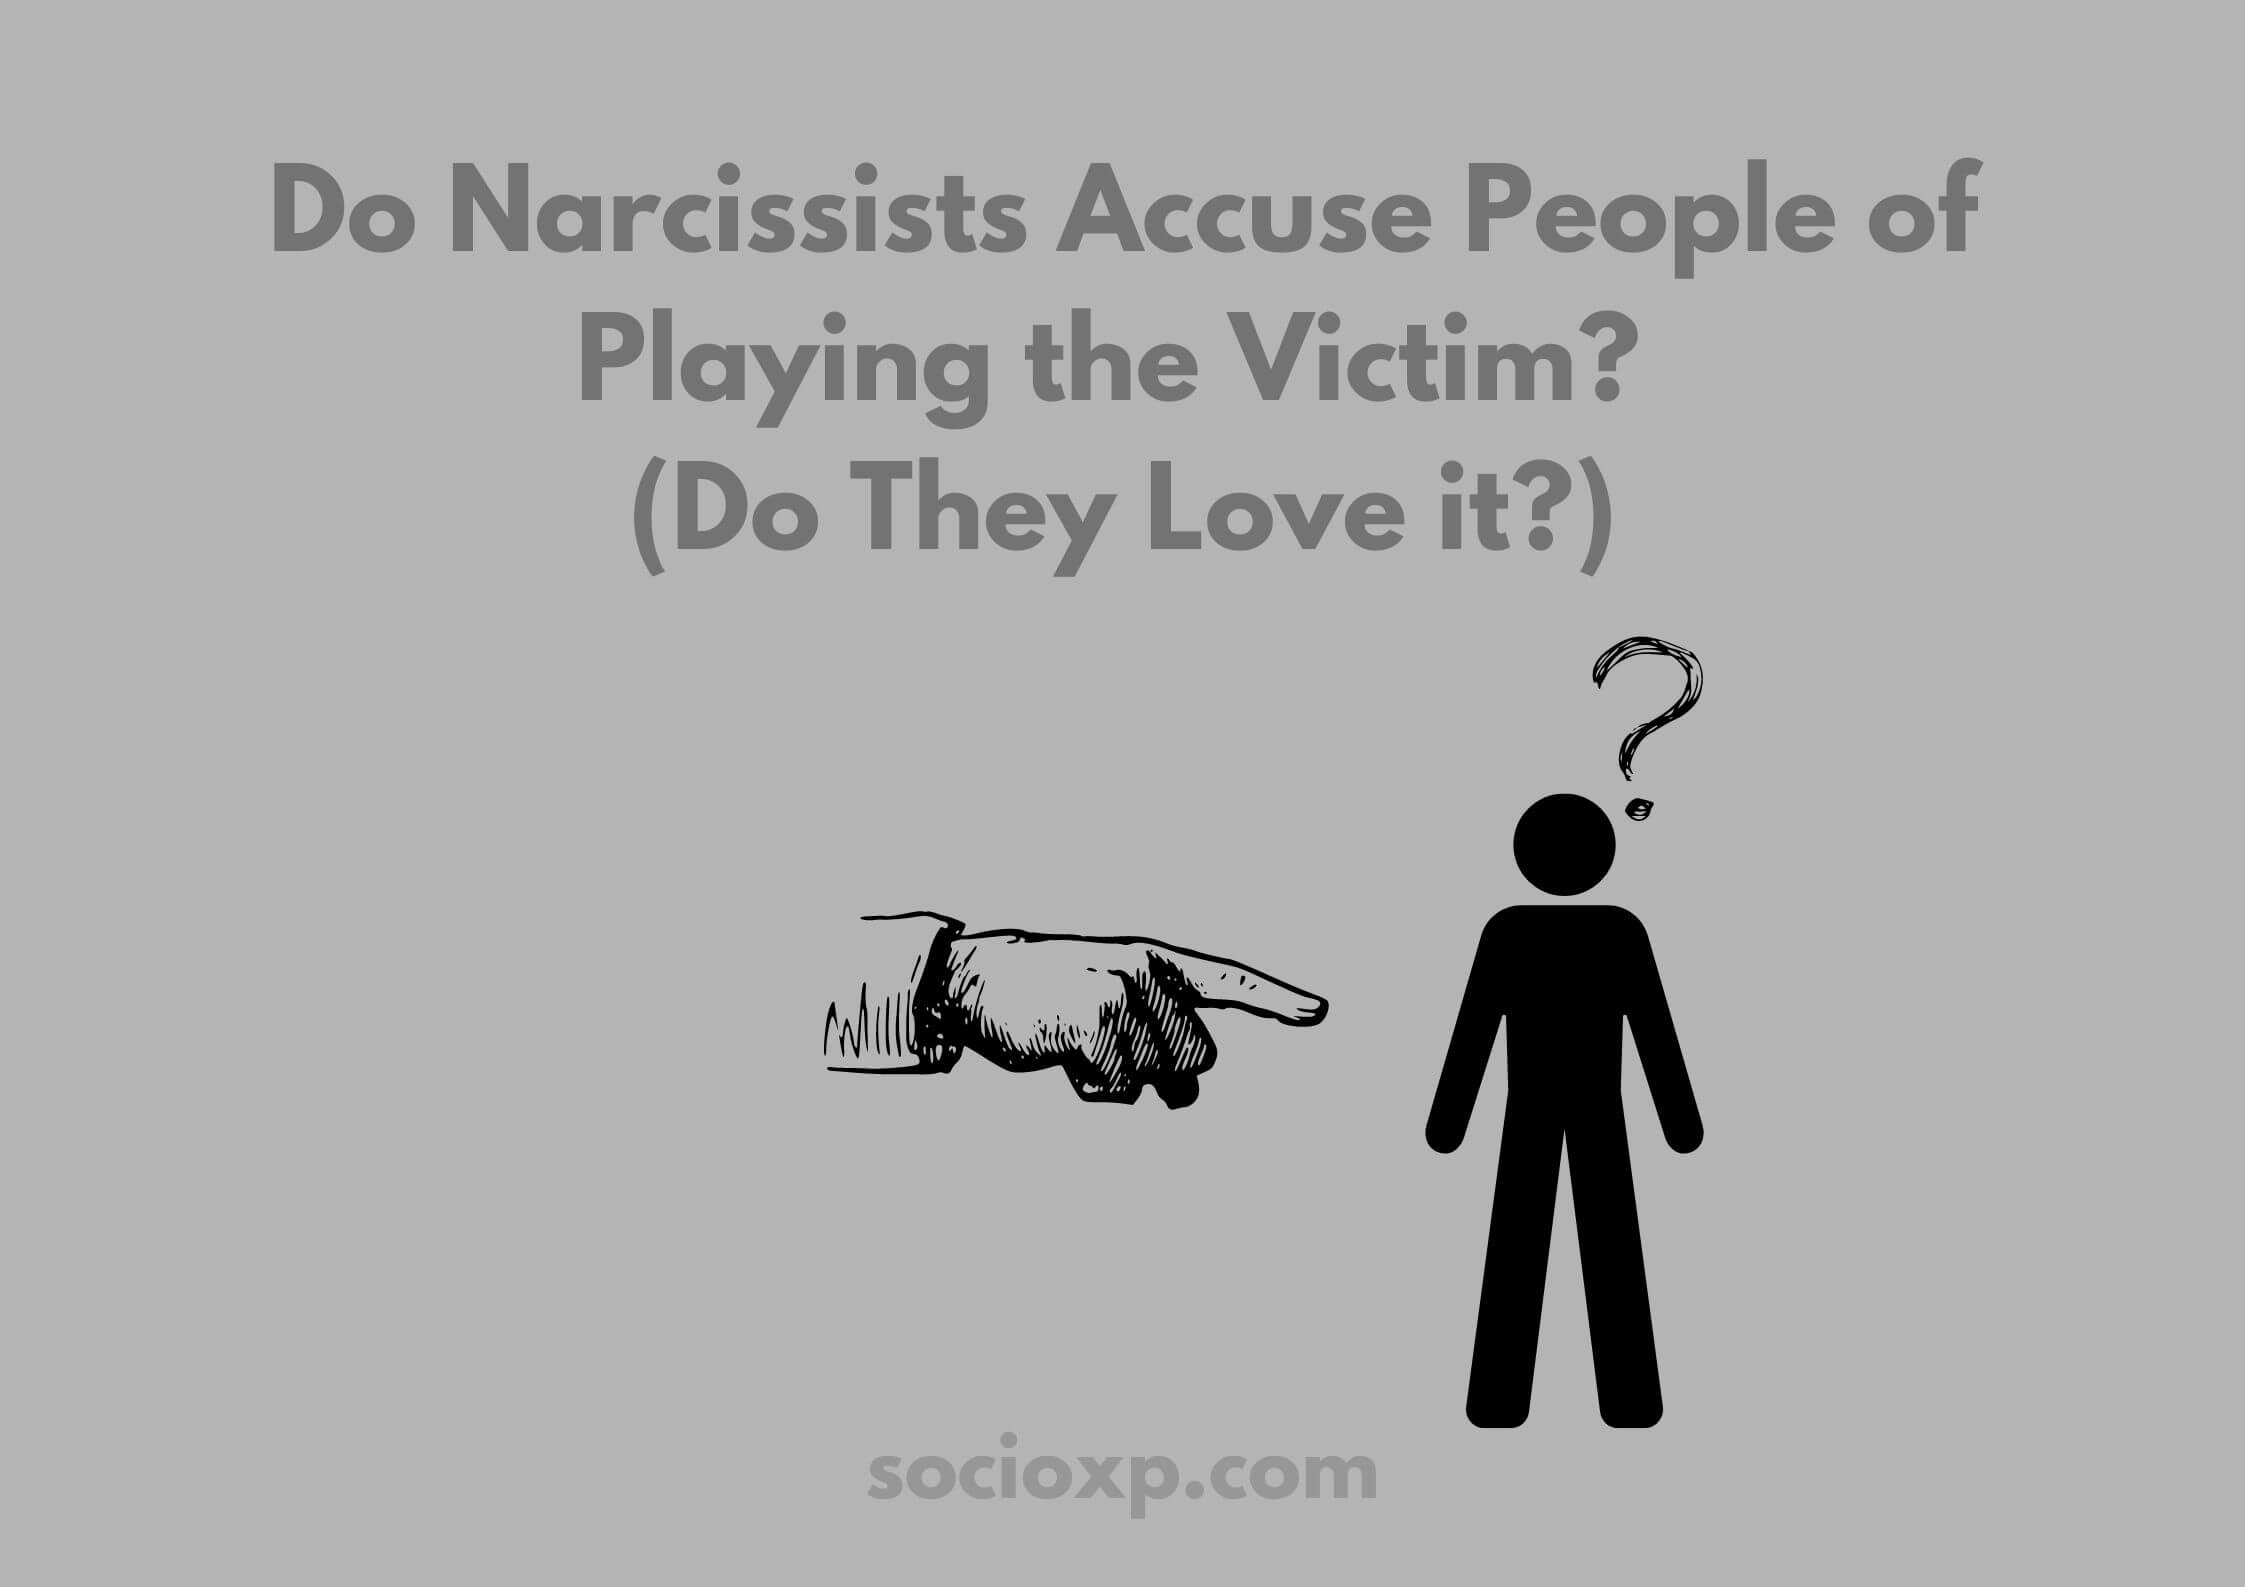 Do Narcissists Accuse People Of Playing The Victim? (Do They Love it?)